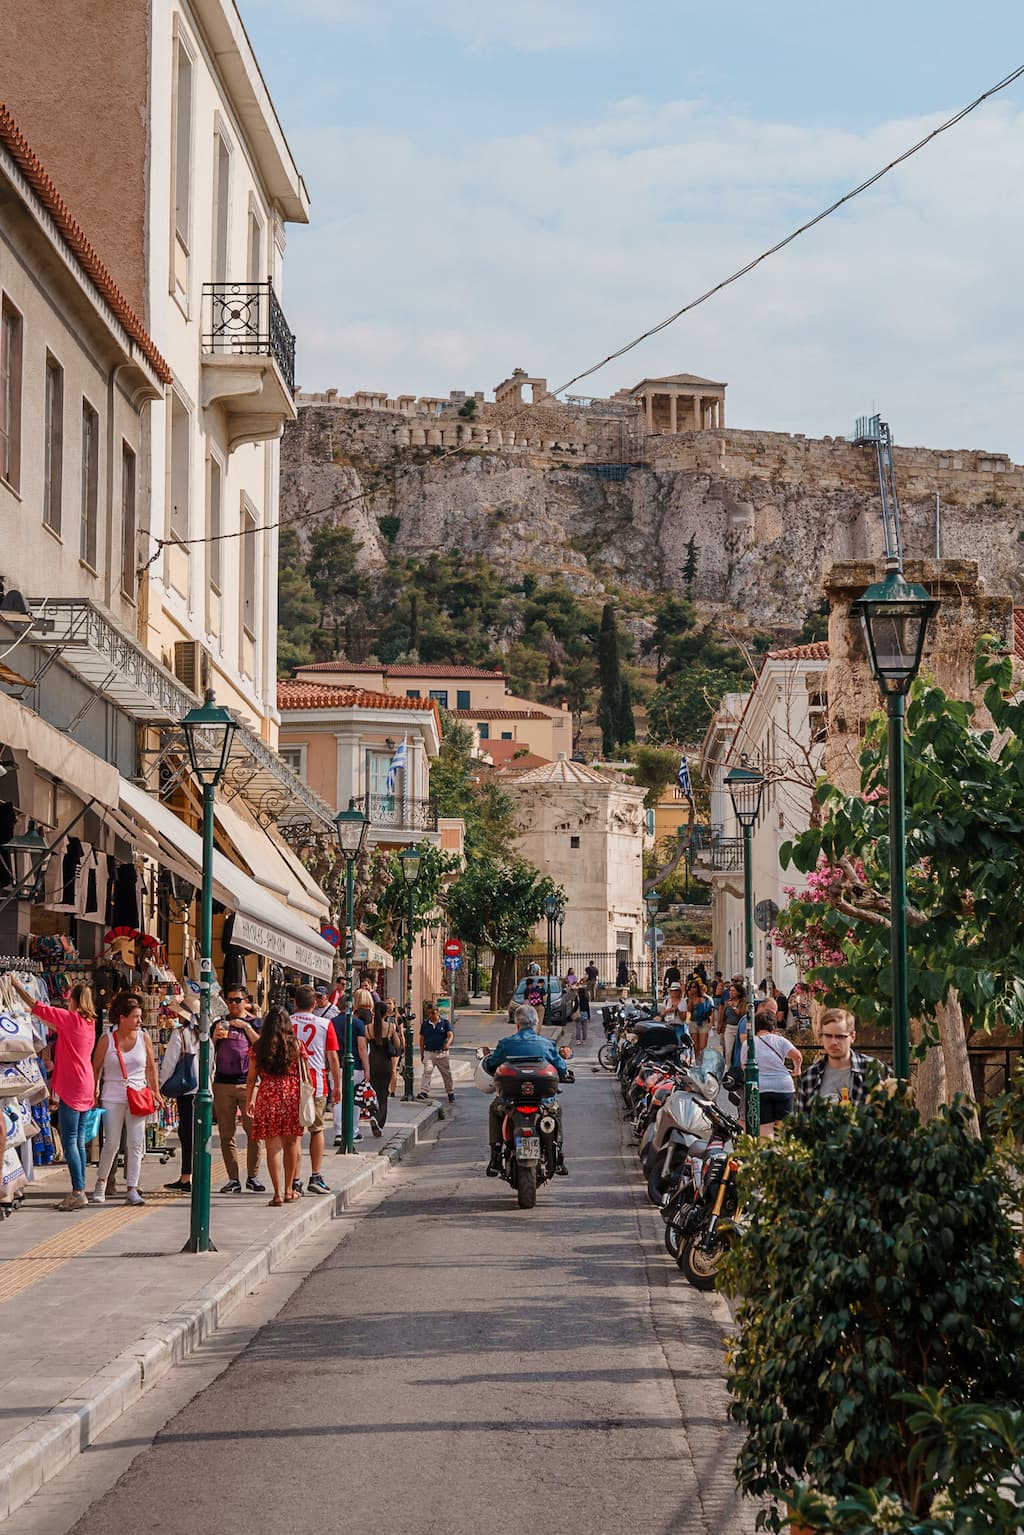 Monastiraki should be at the top of the 4 day itinerary Athens.